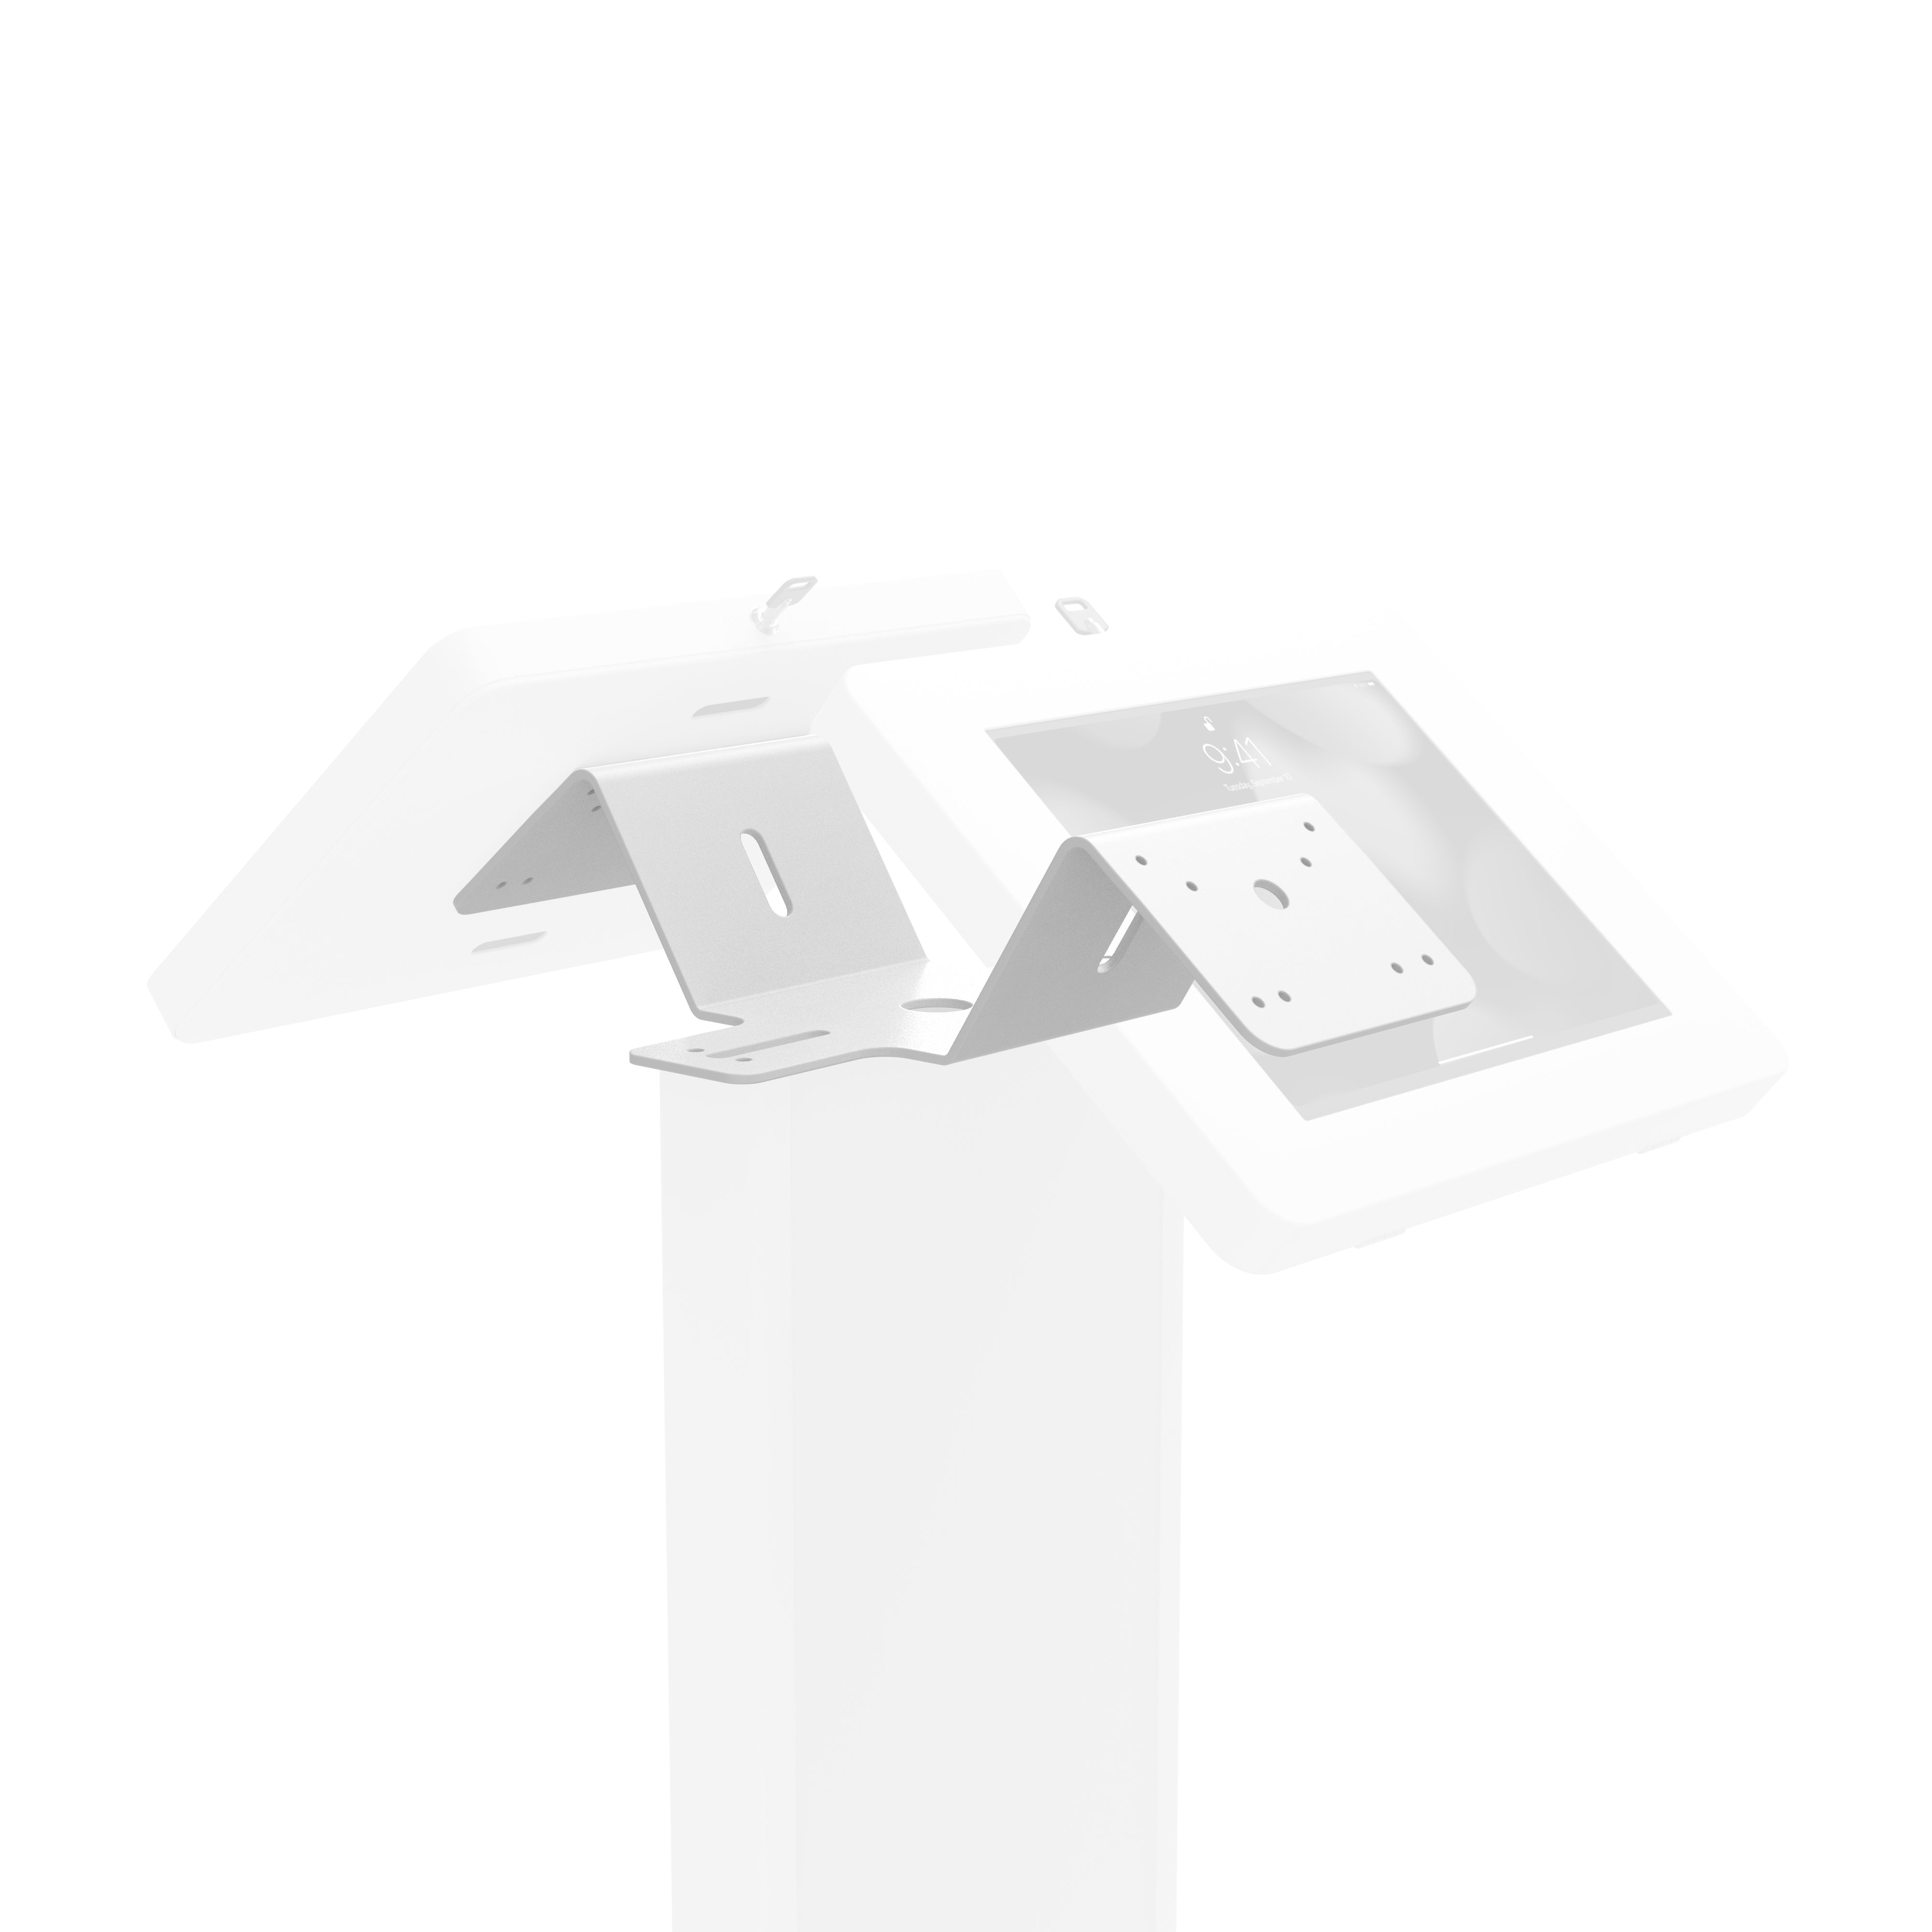 Dual Enclosure Holder for ADD-PARAFS2W (White)